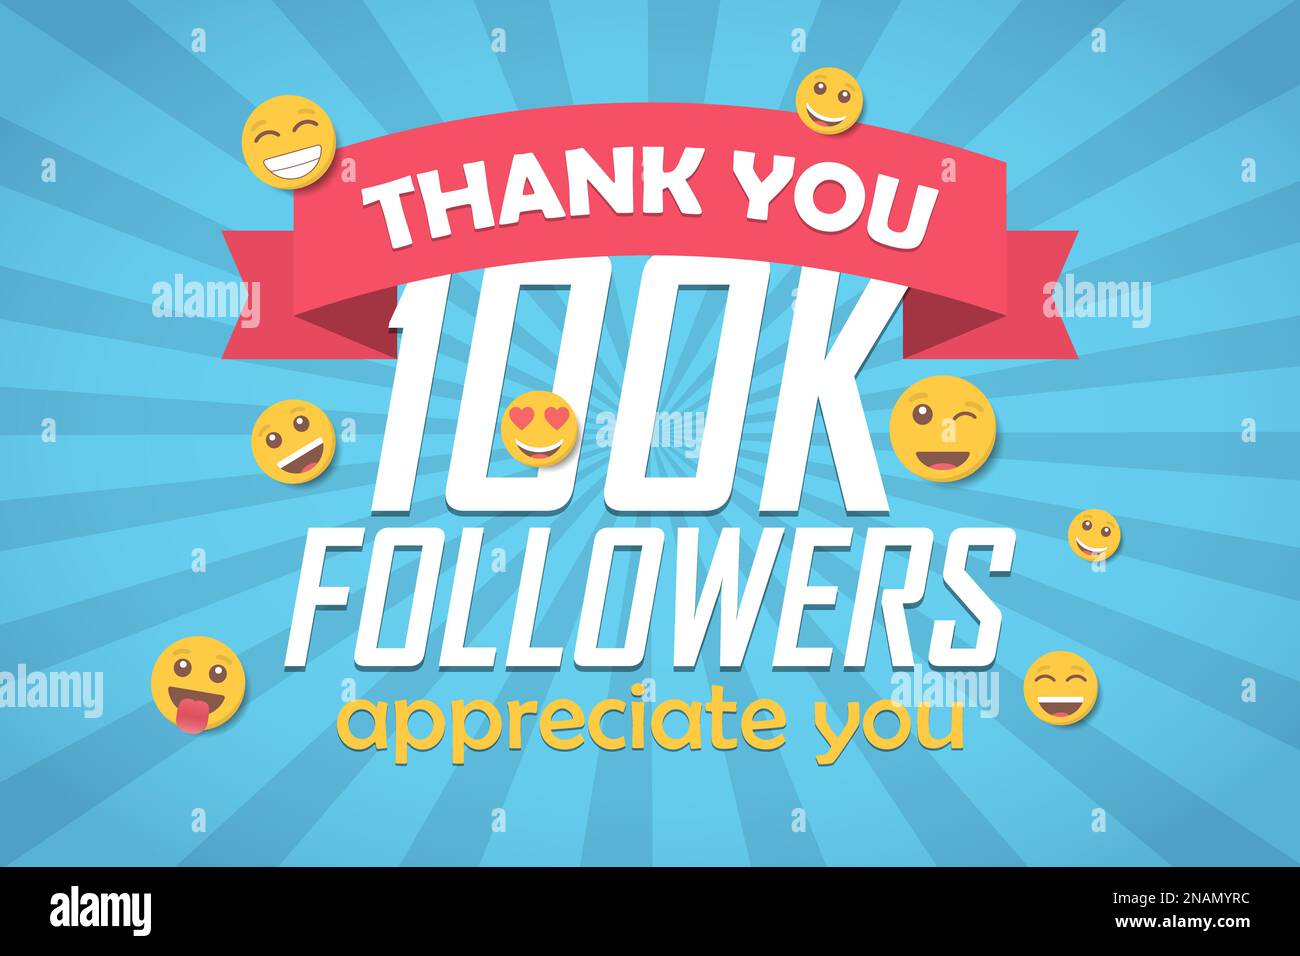 Thank you 100k followers congratulation background with emoticon. Vector illustration Stock Vector